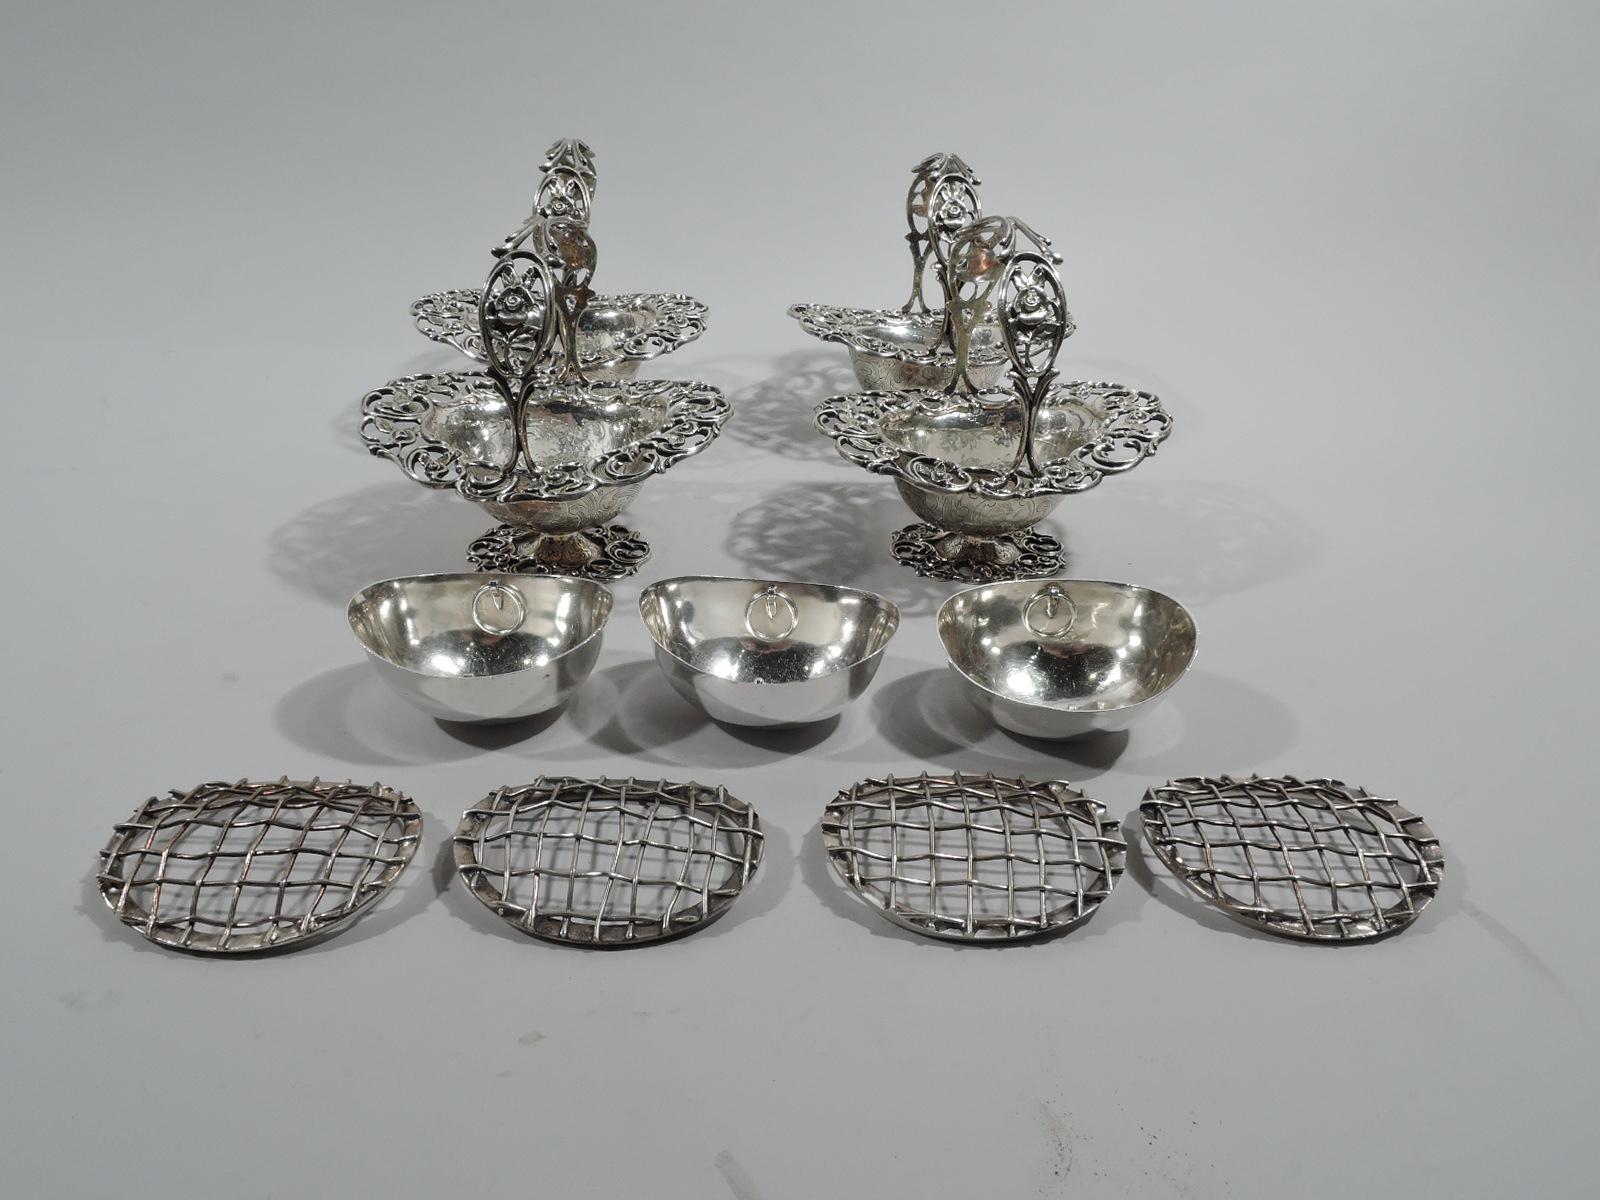 American sterling silver 5-basket garniture, ca 1890. Retailed by Bailey, Banks & Biddle in Philadelphia. There are 4 small baskets and 1 large basket. Each: Oval bowl with fixed c-scroll handle and raised oval foot. Open flowering scrollwork on rim